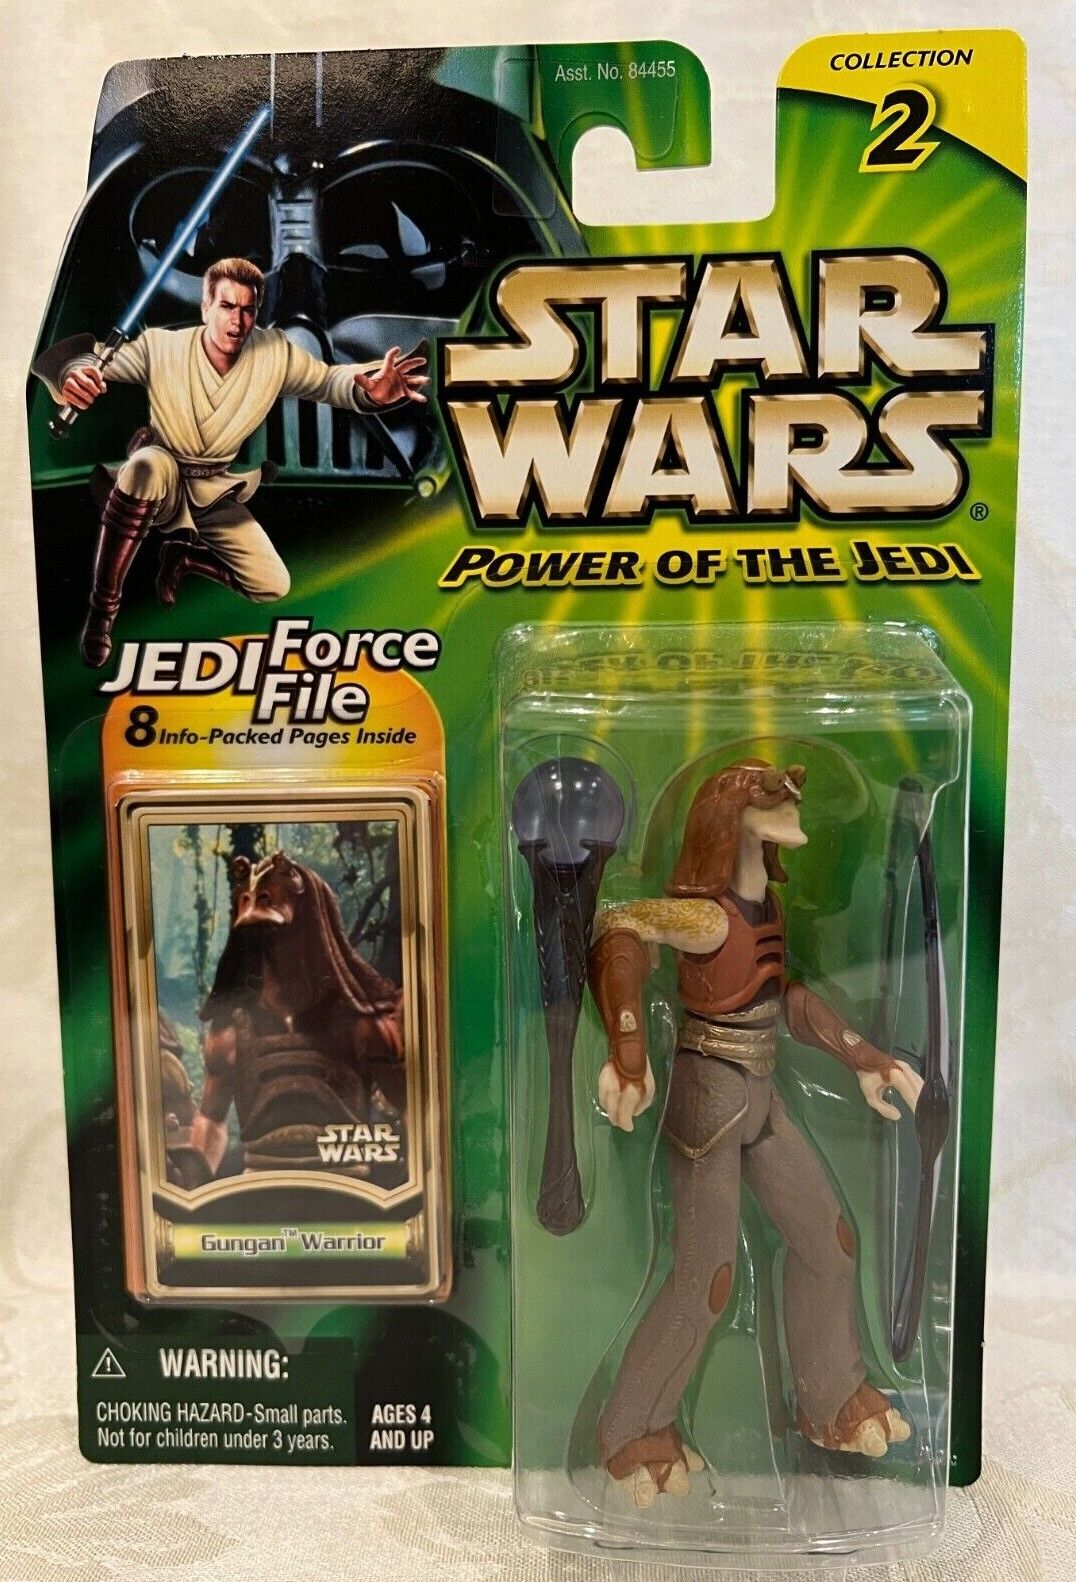 Star Wars Power of the Jedi (POTJ) Action Figures